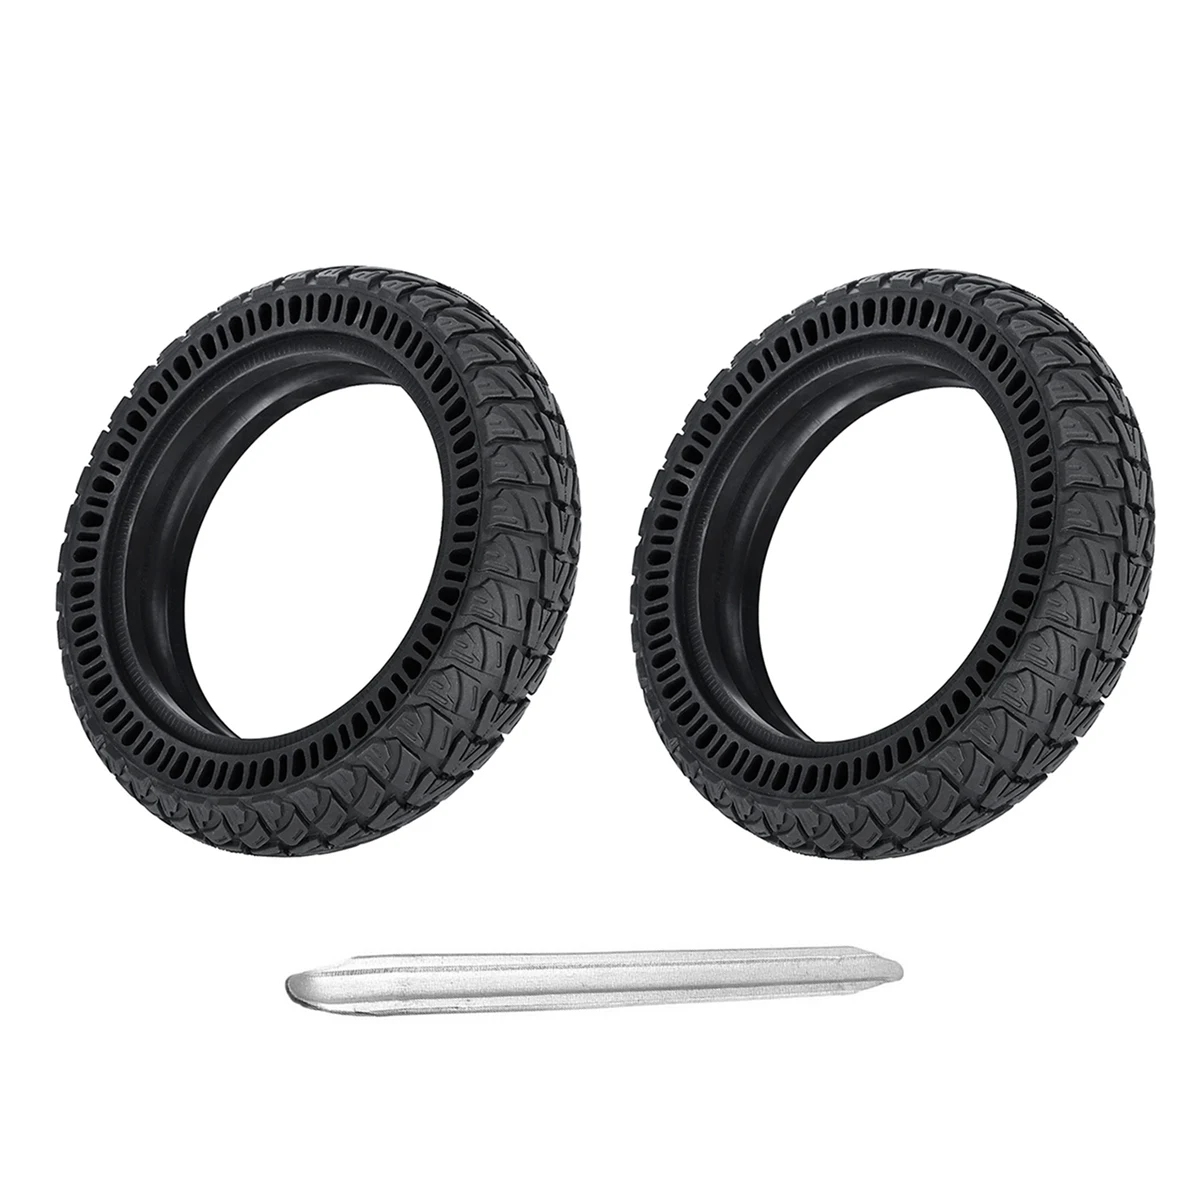 

2PCS Upgrade Damping Solid Tire for Xiaomi M365 for Gotrax XR/M365 Pro 8.5 Inches Solid Honeycomb Shock Tires W/Crowbar